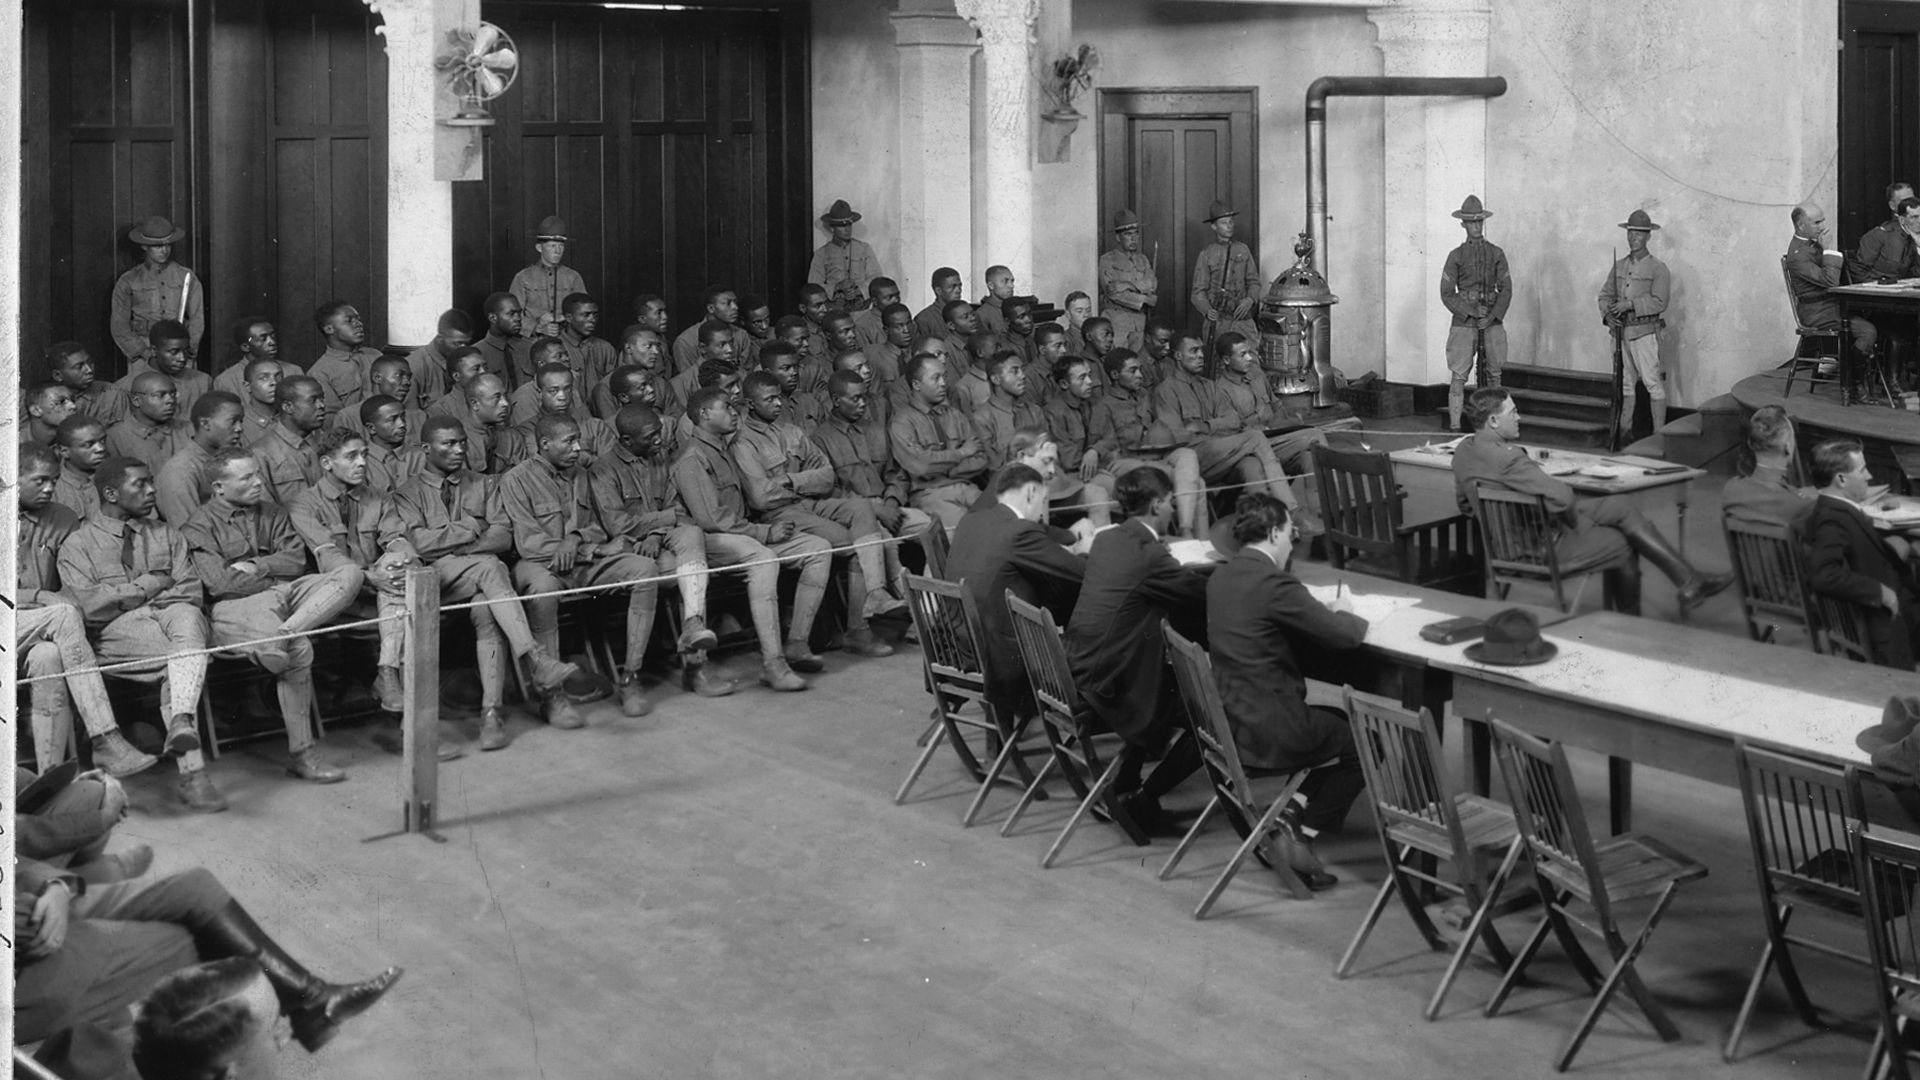 Dozens of Black soldiers sit trial in this black and white photo